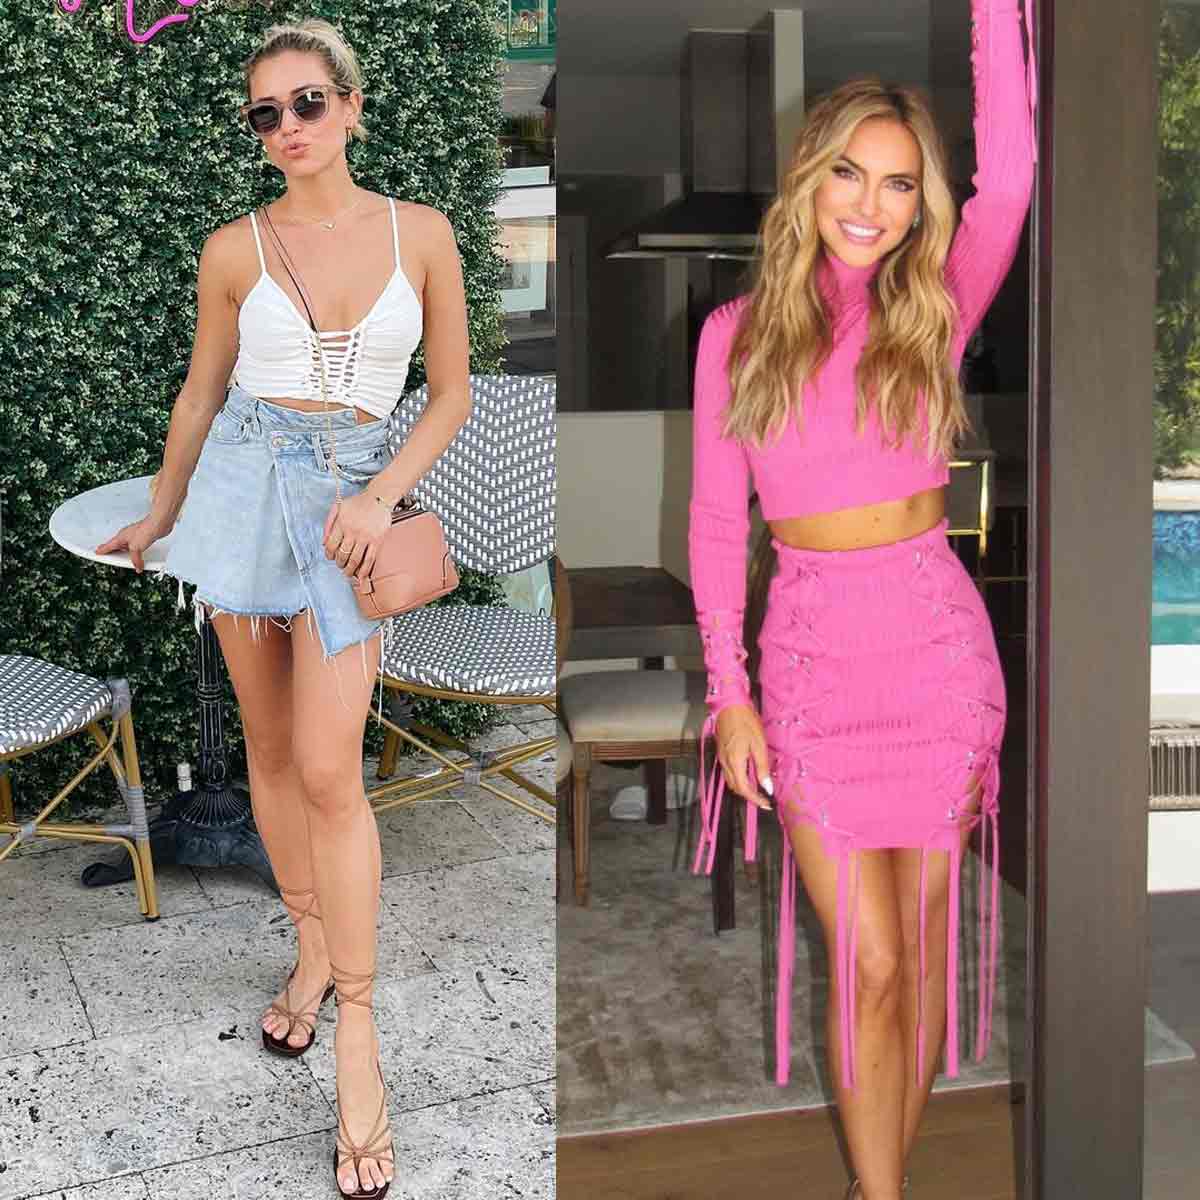 <p>As we’ve said, the ‘90s are coming back. That also means mini-skirts are coming back but excuse us while we call them “short skirts.” It sort of means the same thing, but the short skirts we’ll be wearing this year aren’t quite what we remember from the <em>Clueless</em> days in the early 2000s.</p> <p>Sure, these are shorter than the average knee-length version, but they don’t show your bottom when you bend over. That’s not fashionable on anyone. It can be tough for taller girls to get the right combo, but when you do, you’ll love it. Try the short skirt trend this summer. If you really feel uncomfortable, try some leggings under it!</p>  <p>(Image via <a href="https://www.instagram.com/p/CRZ_VBBncxI/">Instagram</a>; <a href="https://www.instagram.com/p/CTIE6BaFK7q/">Instagram</a>)</p>